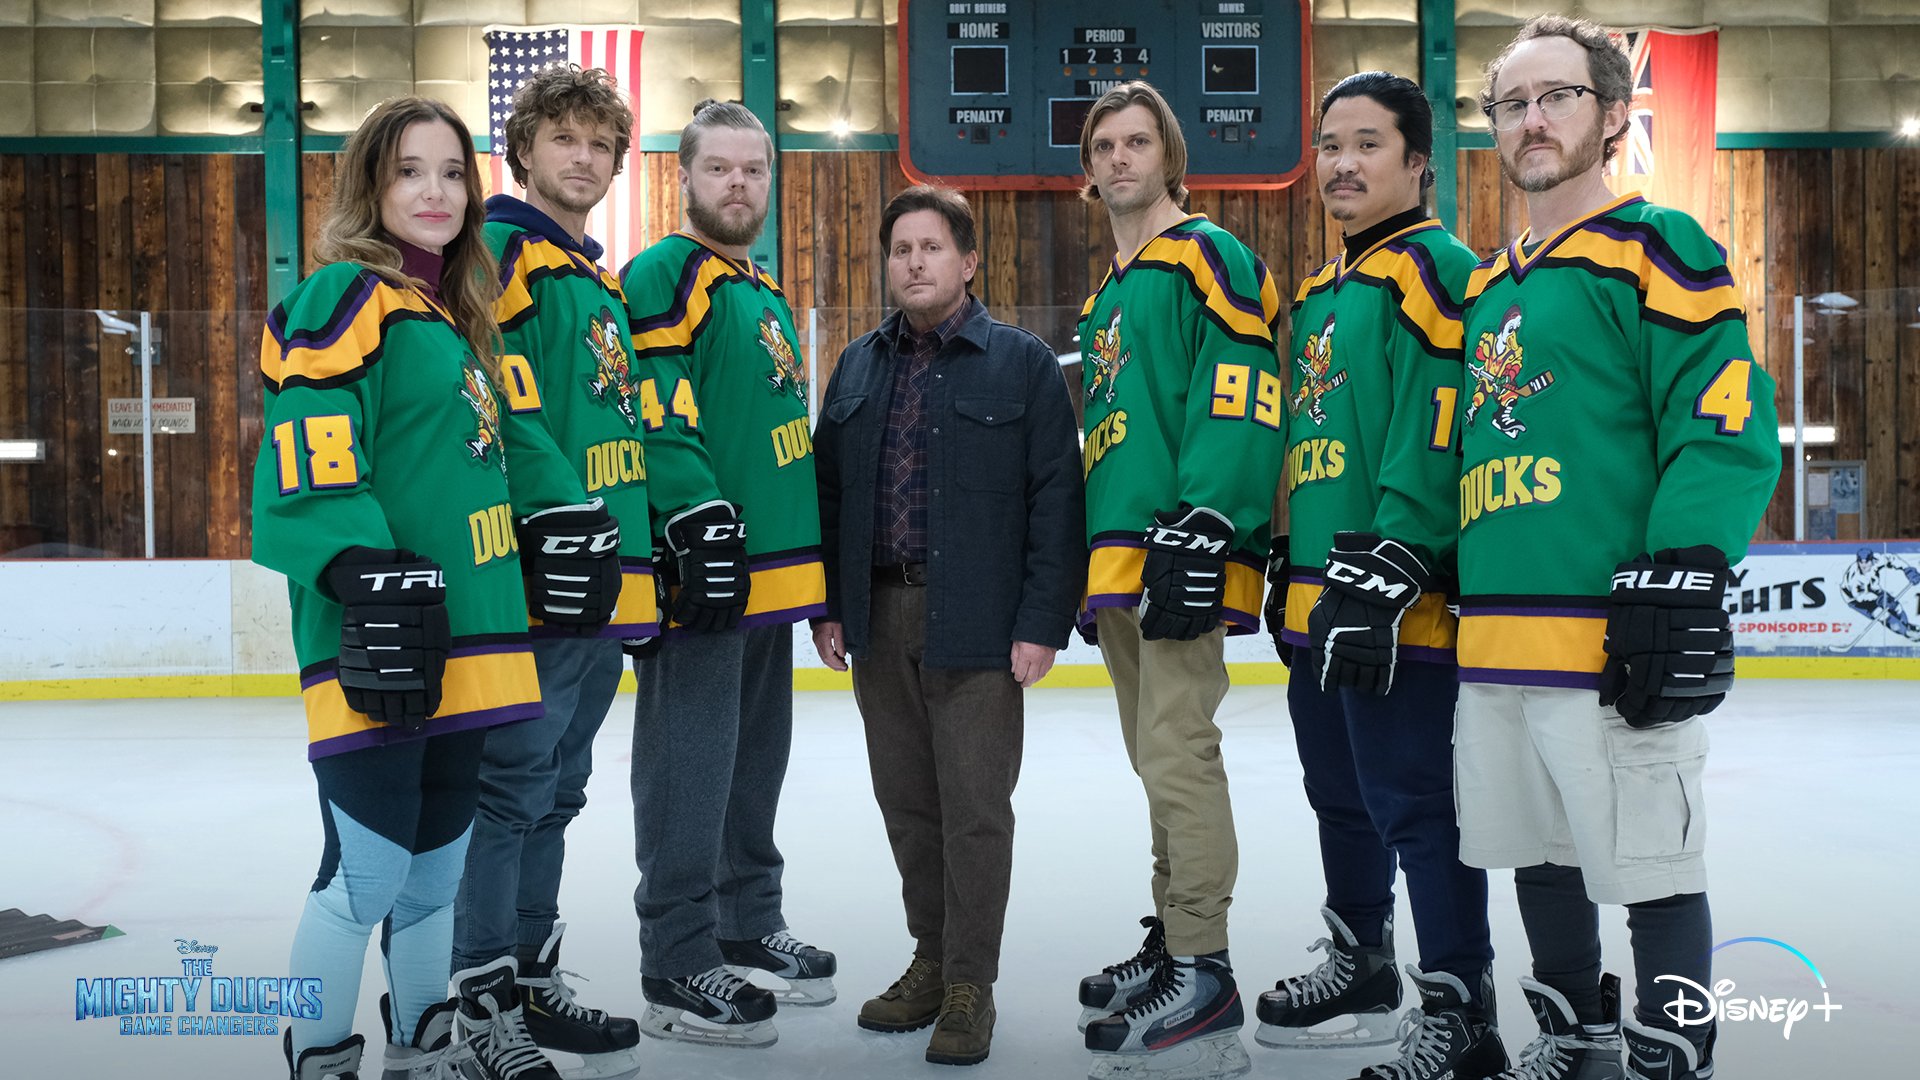 The Mighty Ducks: Game Changers stars talk about the new season., National  Hockey League, Disney+